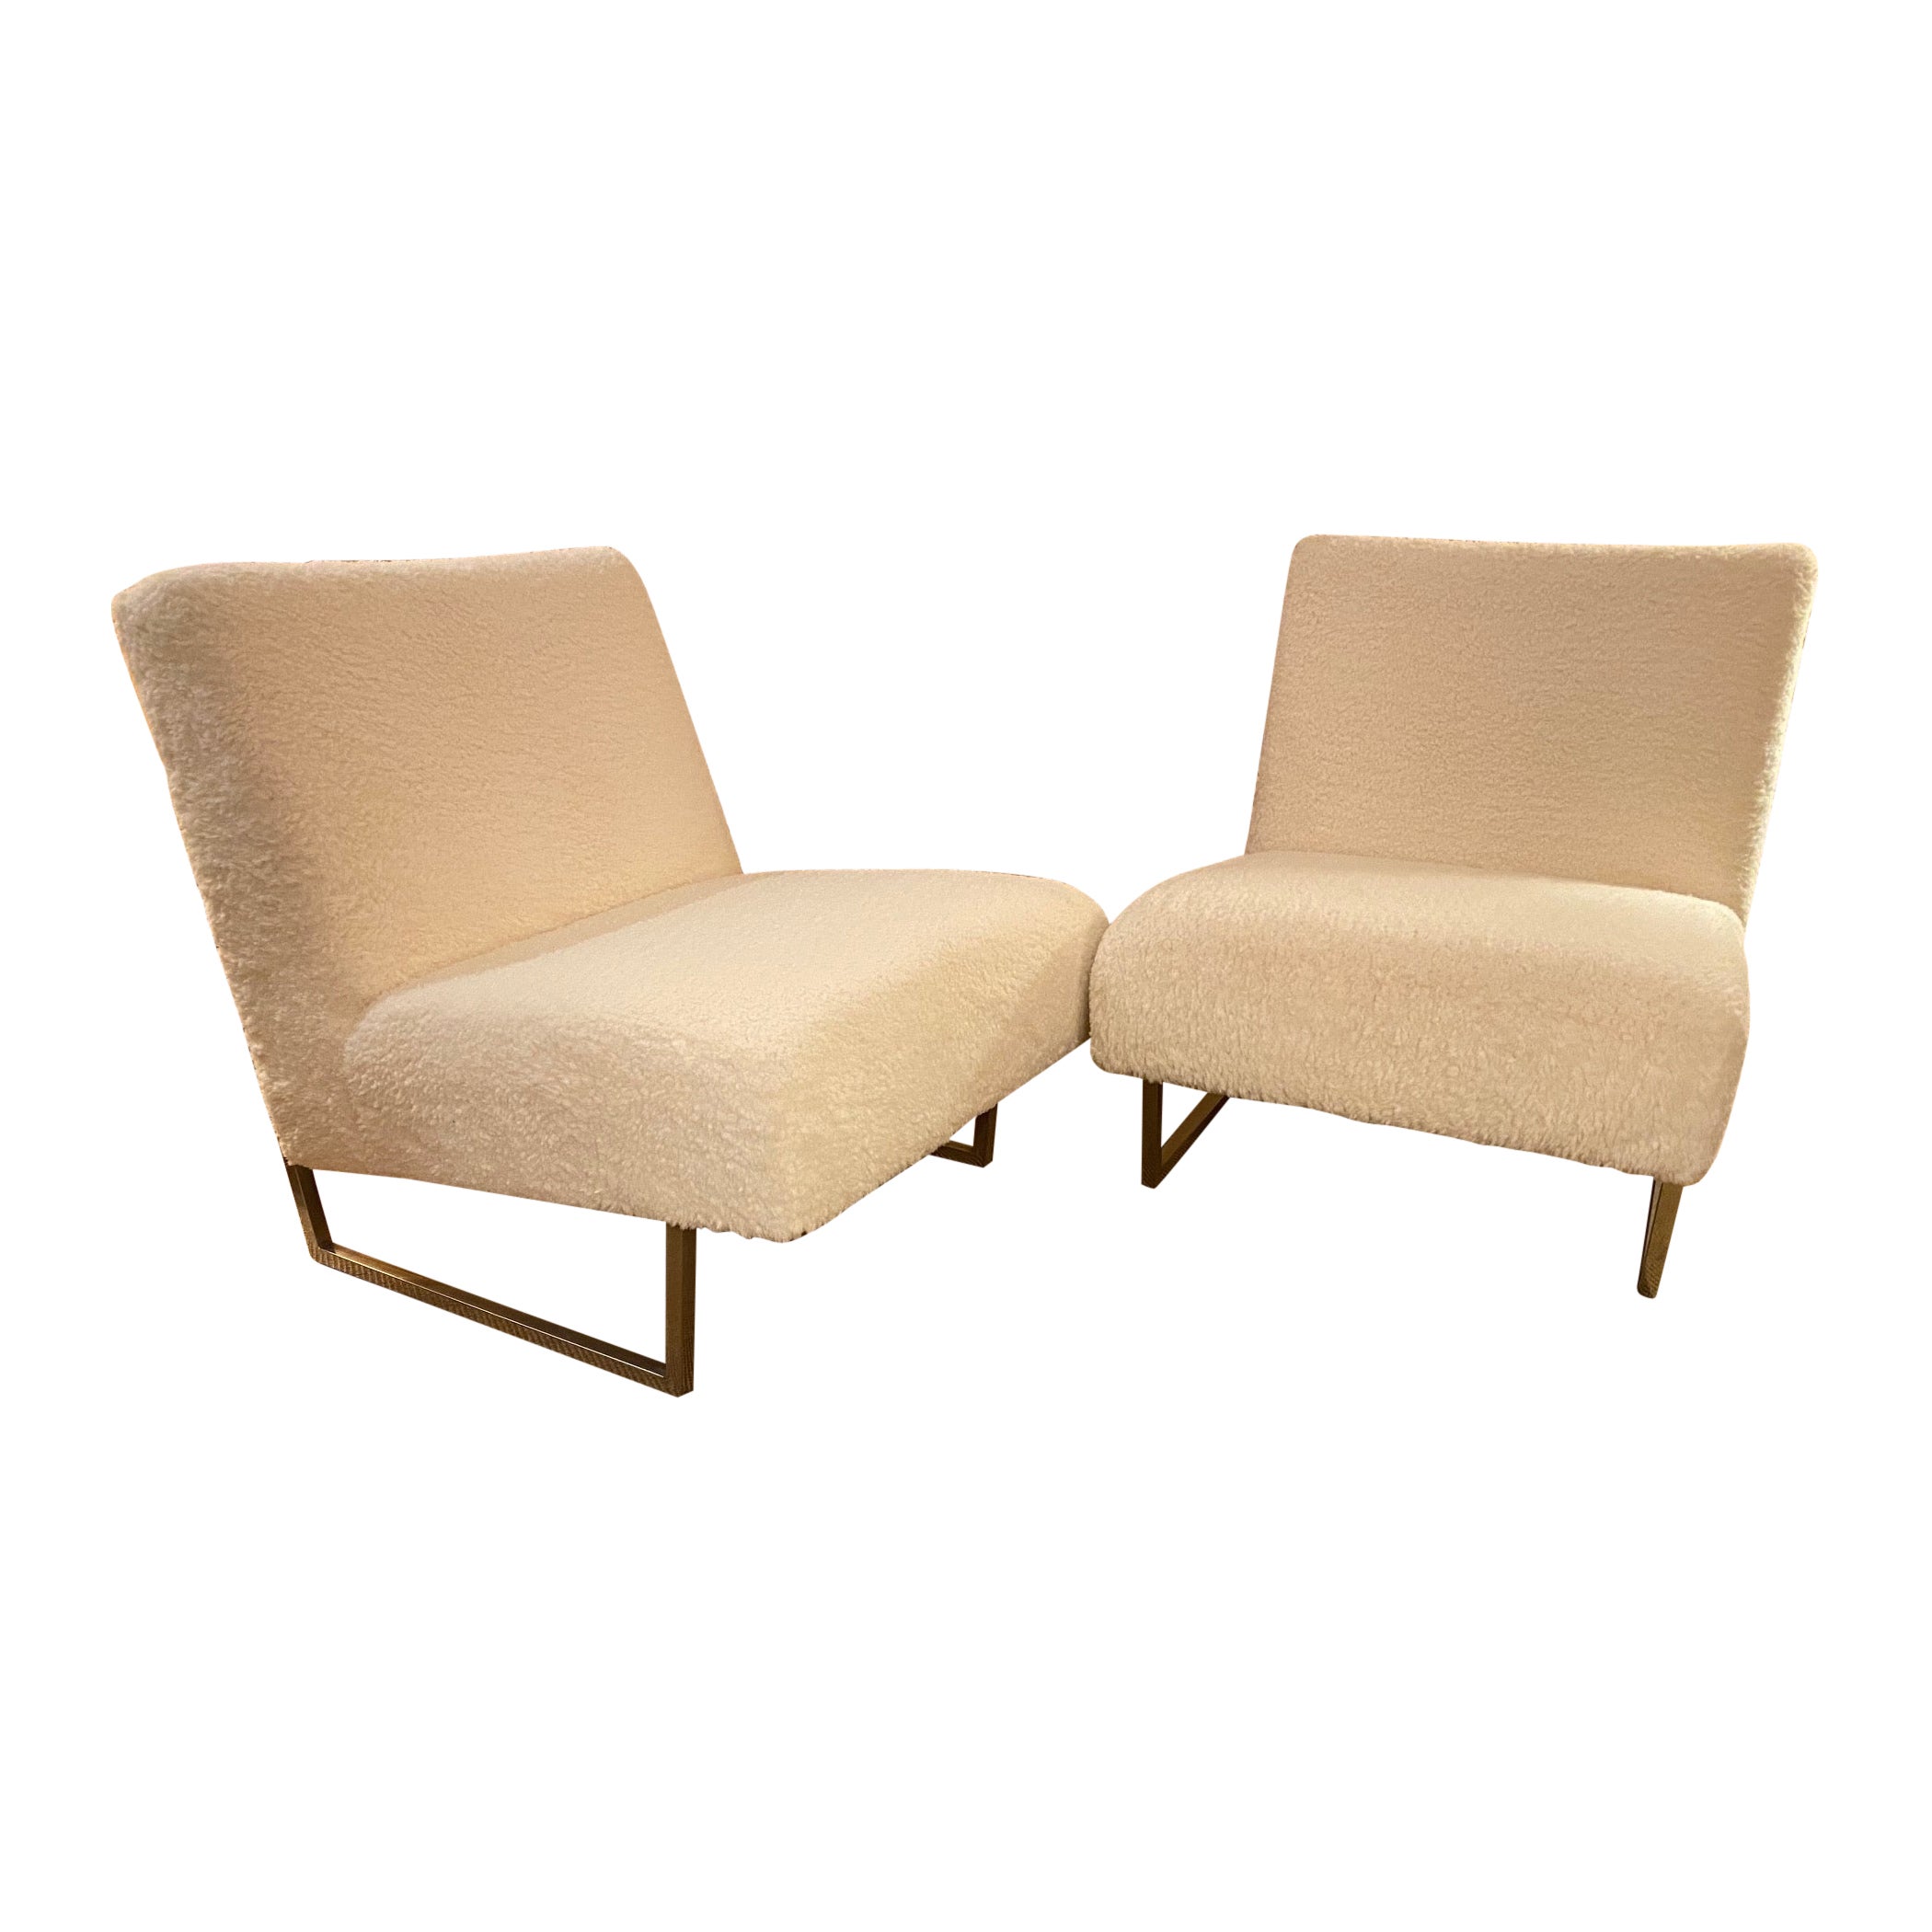 Pair of Slipper Chairs "Courchevel" by Pierre Guariche, France, 1959